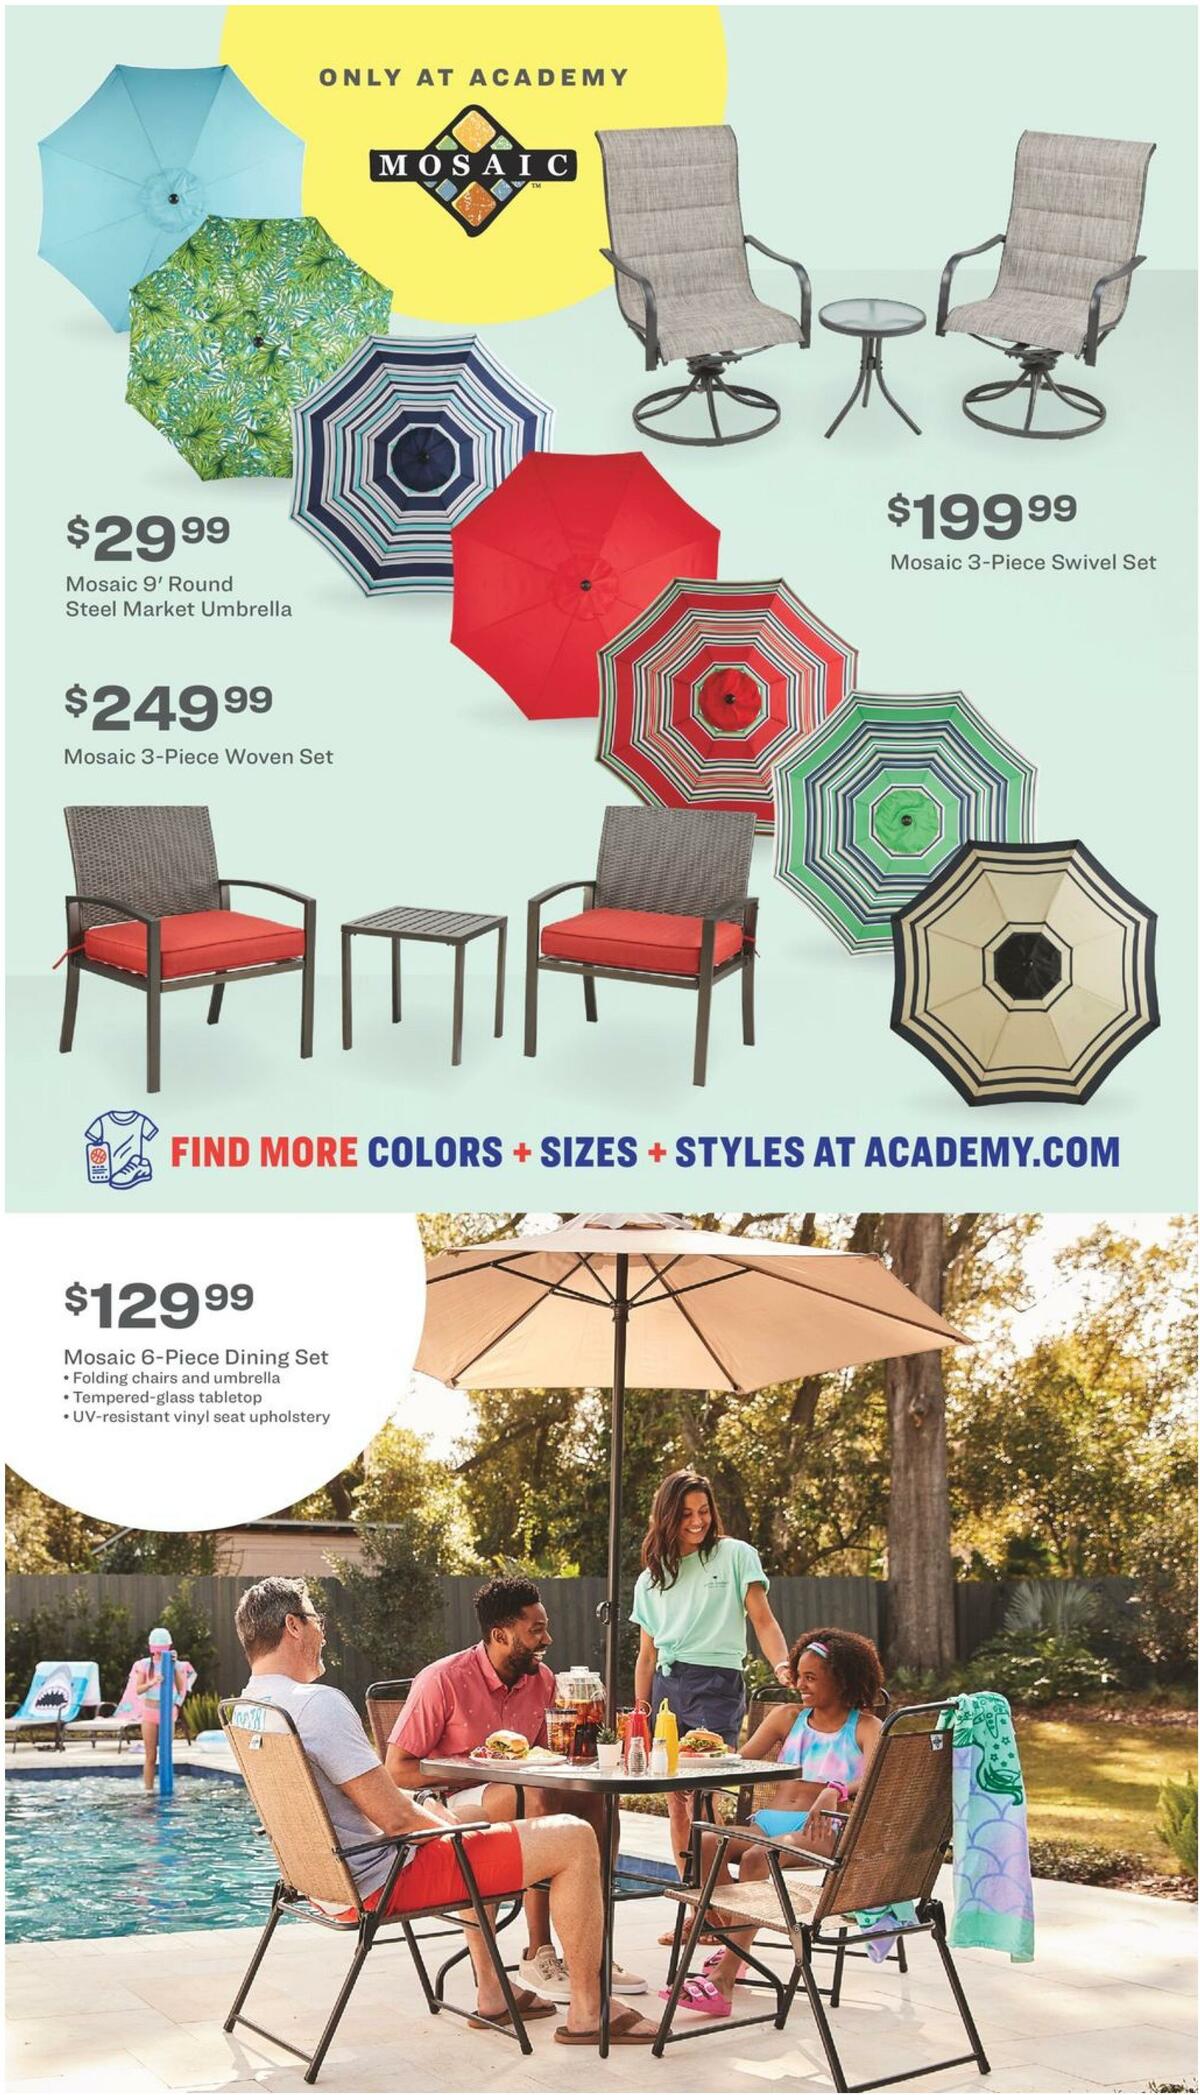 Academy Sports + Outdoors Summer Fun Guide Weekly Ad from May 18